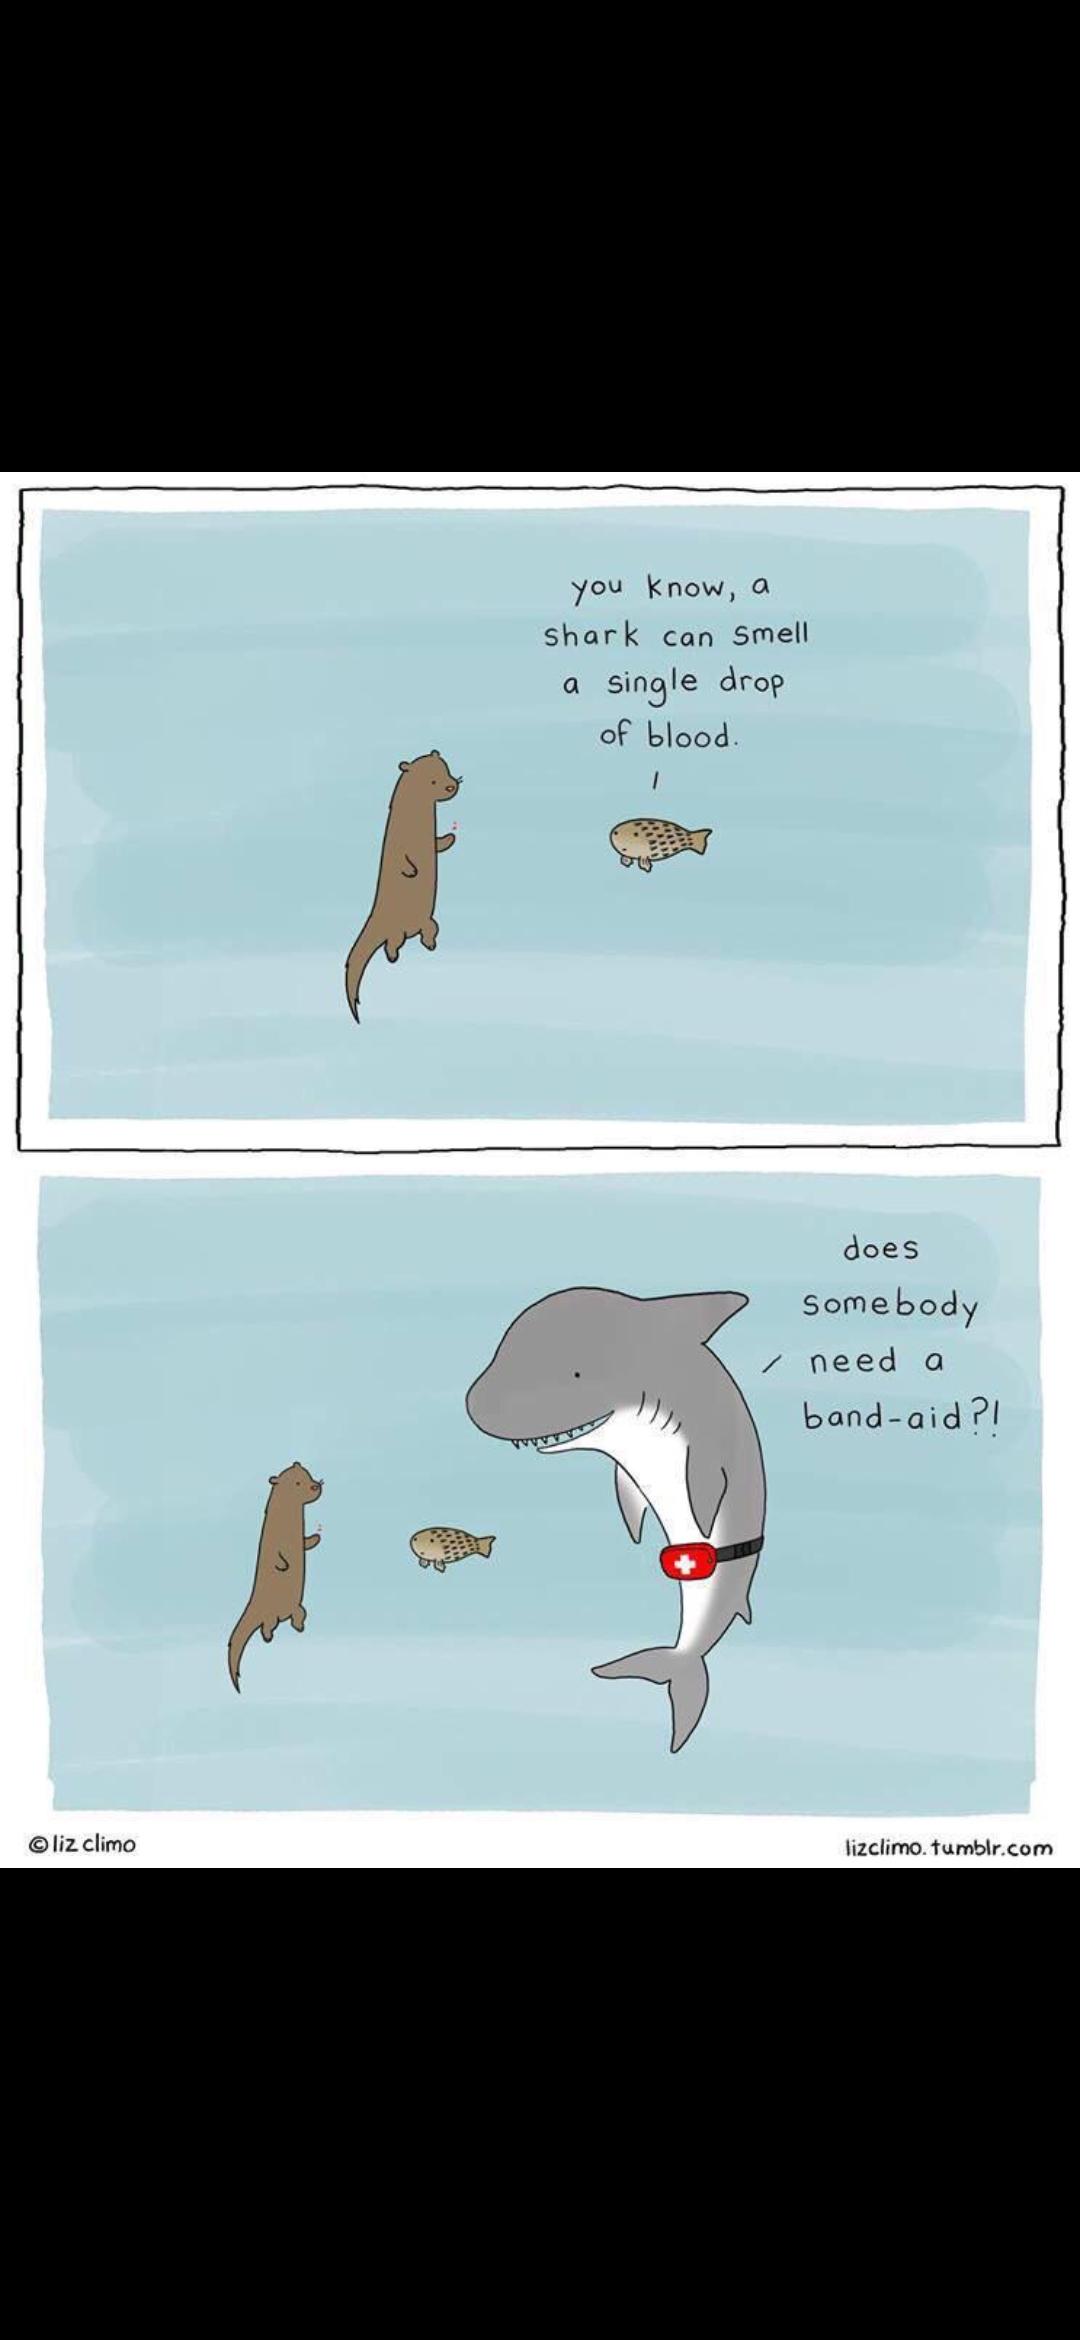 cute wholesome-memes cute text: @liz climo you know, a shark can smell a single drop of blood. 1 does some body / need a band-aid PI lizclimo.tumblr.com 